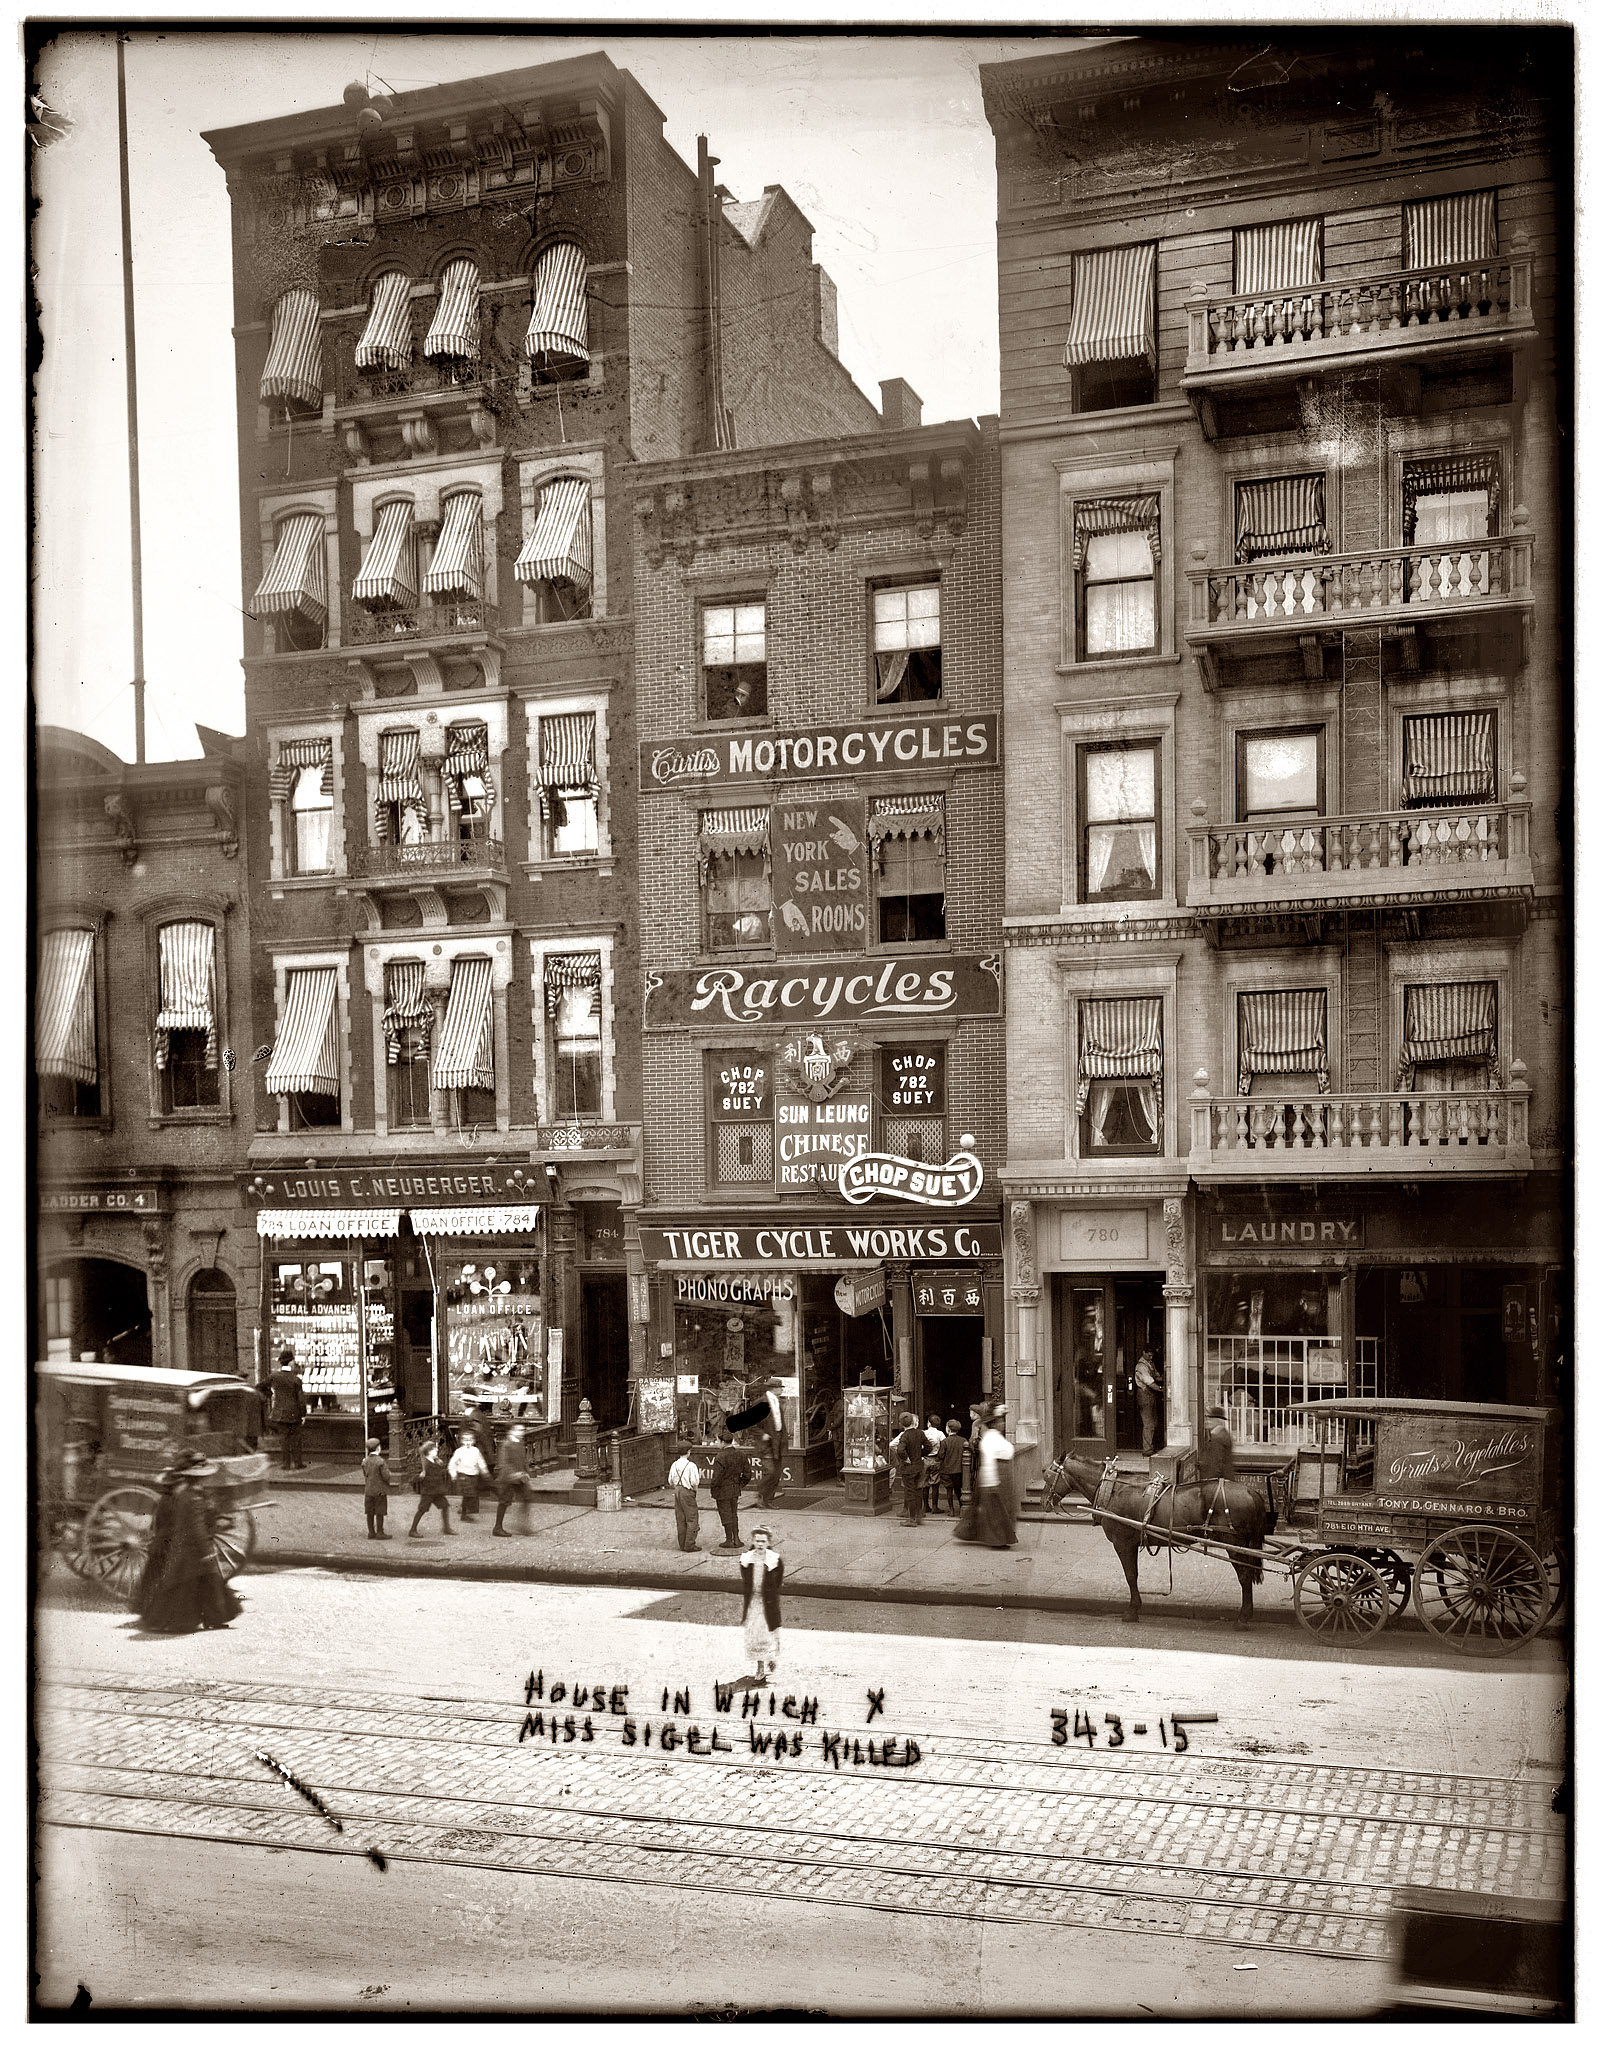 "House in which Miss Sigel was killed." The building at 782 Eighth Avenue in New York where the body of Elsie Sigel was found in a trunk. Click here for another view (of different buildings?) and more information on a very cold case from 1909. View full size. George Grantham Bain Collection.
